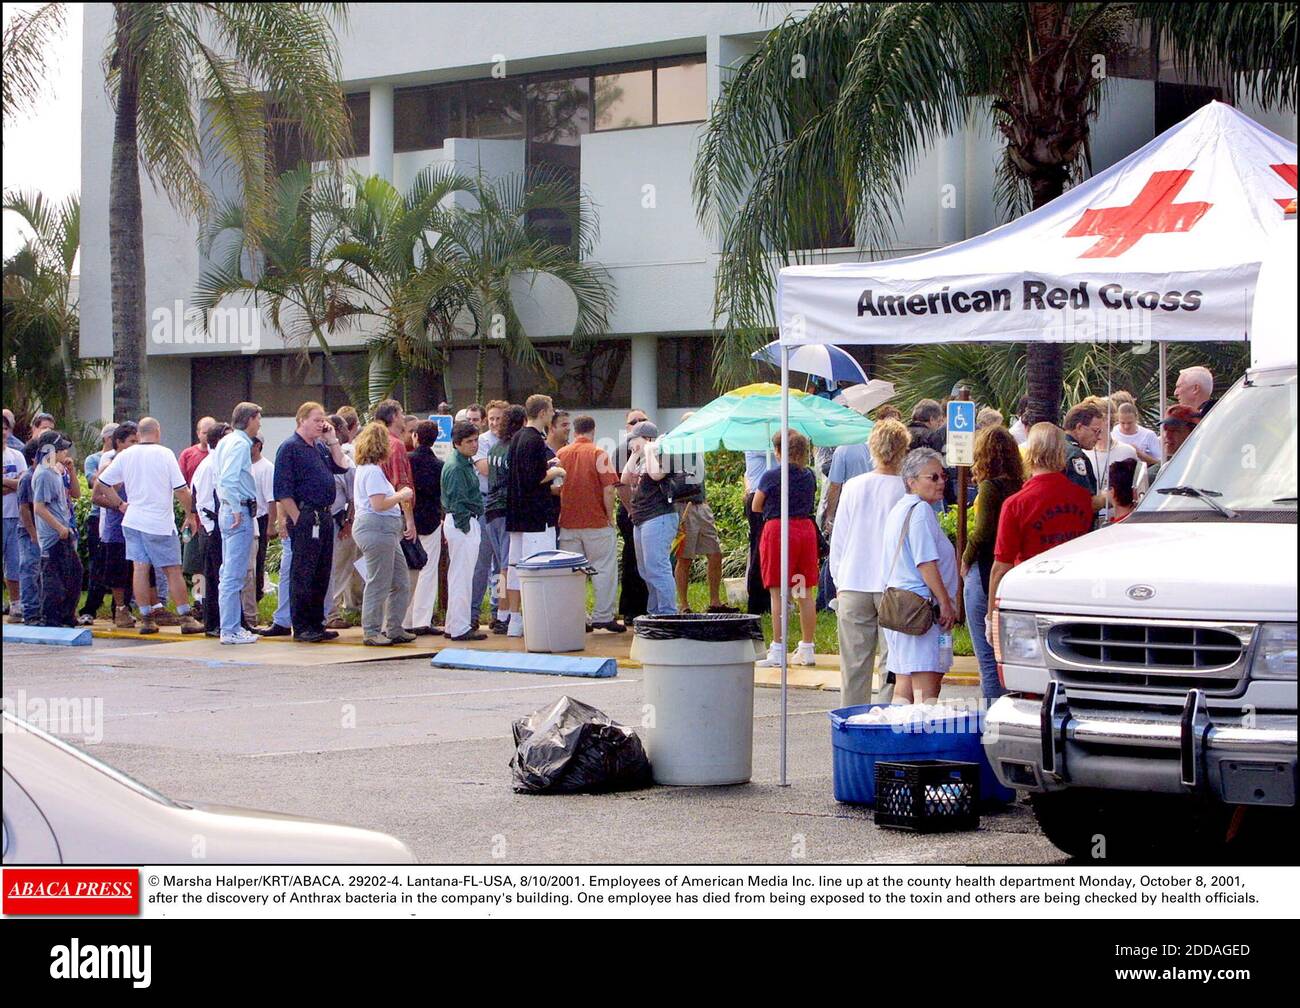 NO FILM, NO VIDEO, NO TV, NO DOCUMENTARY - © Marsha Halper/KRT/ABACA. 29202-4. Lantana-FL-USA, 8/10/2001. Employees of American Media Inc. line up at the county health department Monday, October 8, 2001, after the discovery of Anthrax bacteria in the company's building. One employee has died from Stock Photo